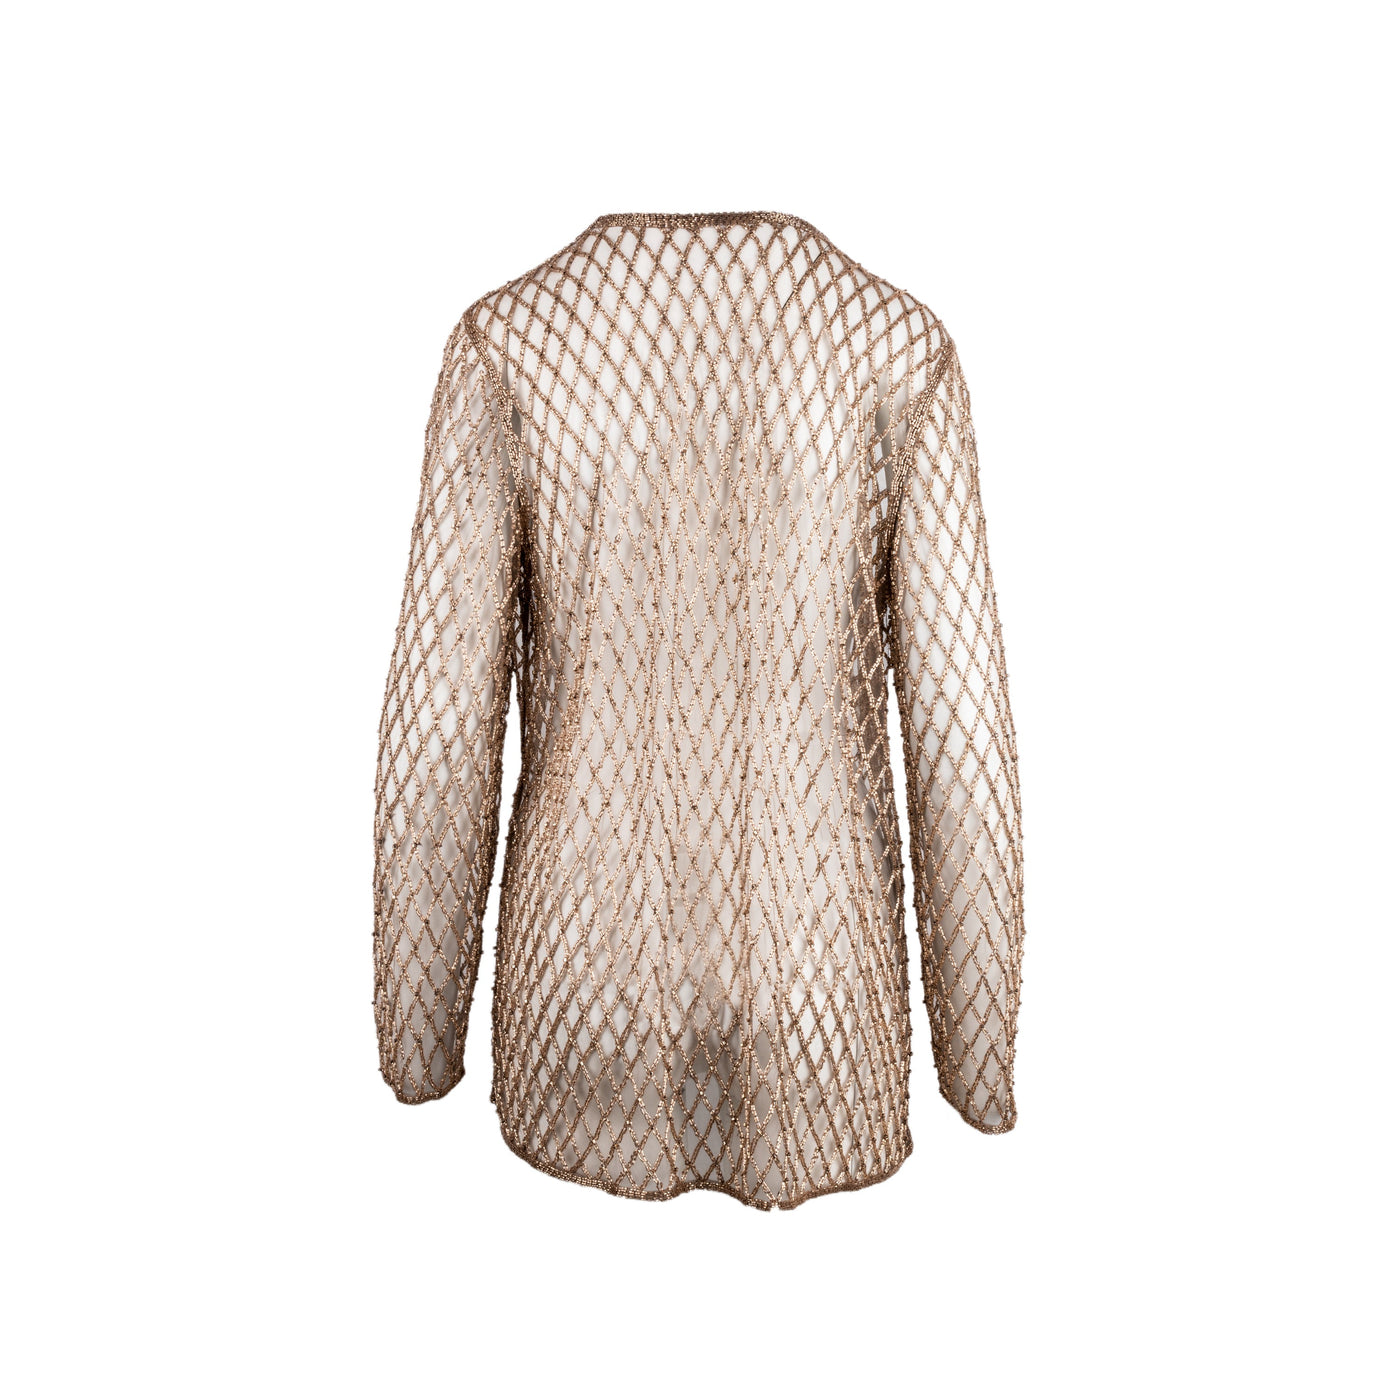 Collection Privée golden jacket. Semi-transparent, long sleeves, embroidered with tubular crystals pre-owned